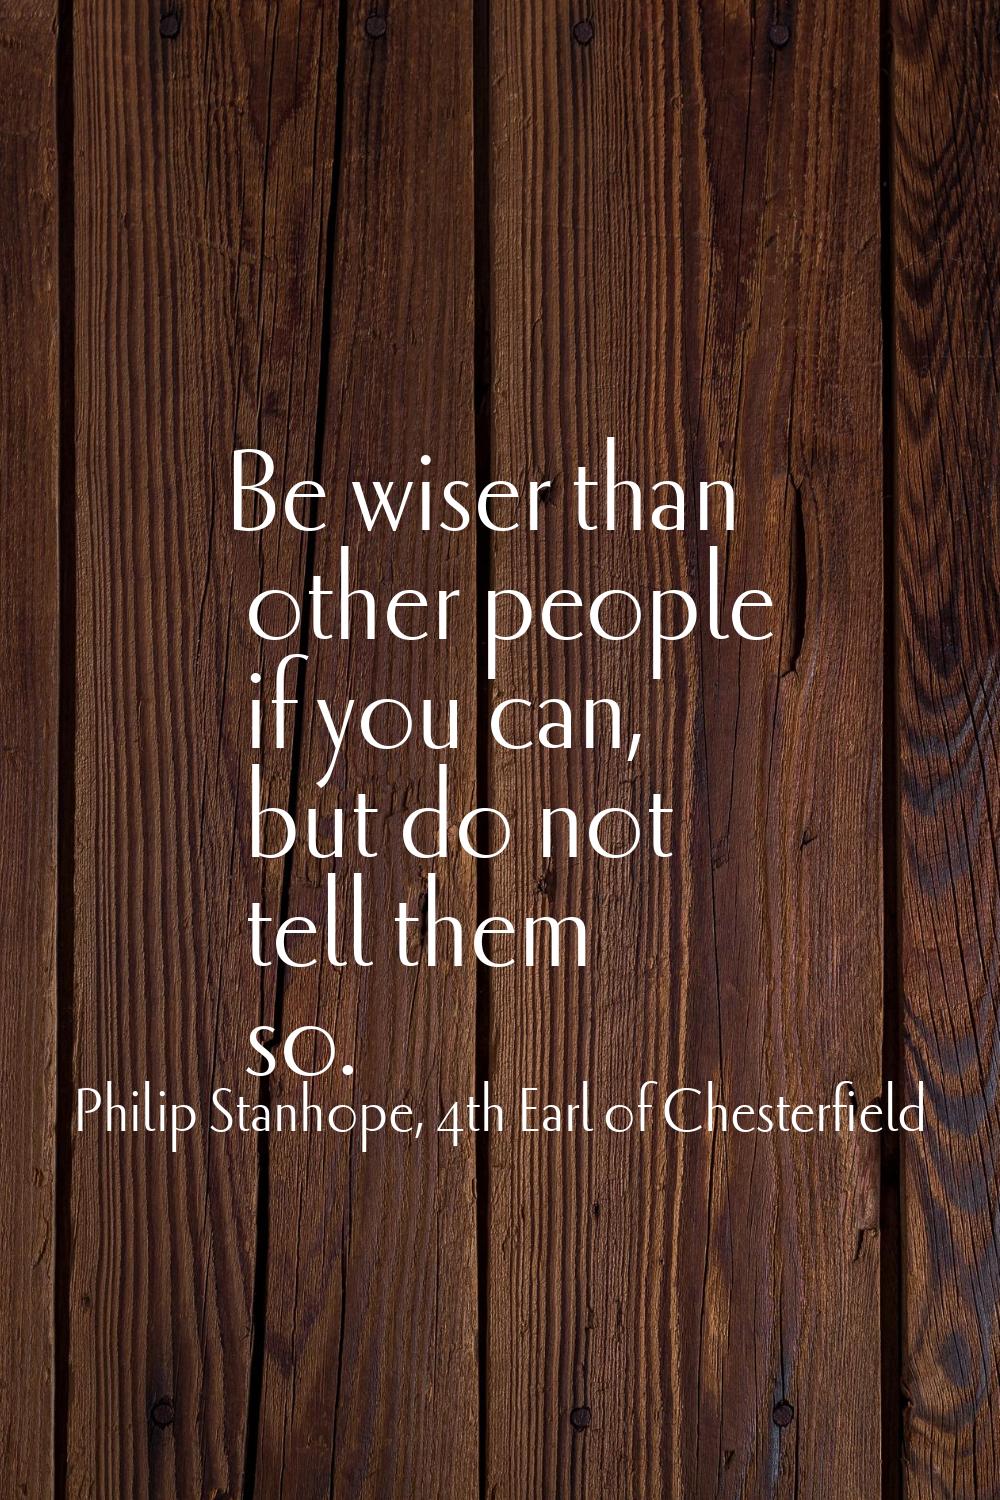 Be wiser than other people if you can, but do not tell them so.